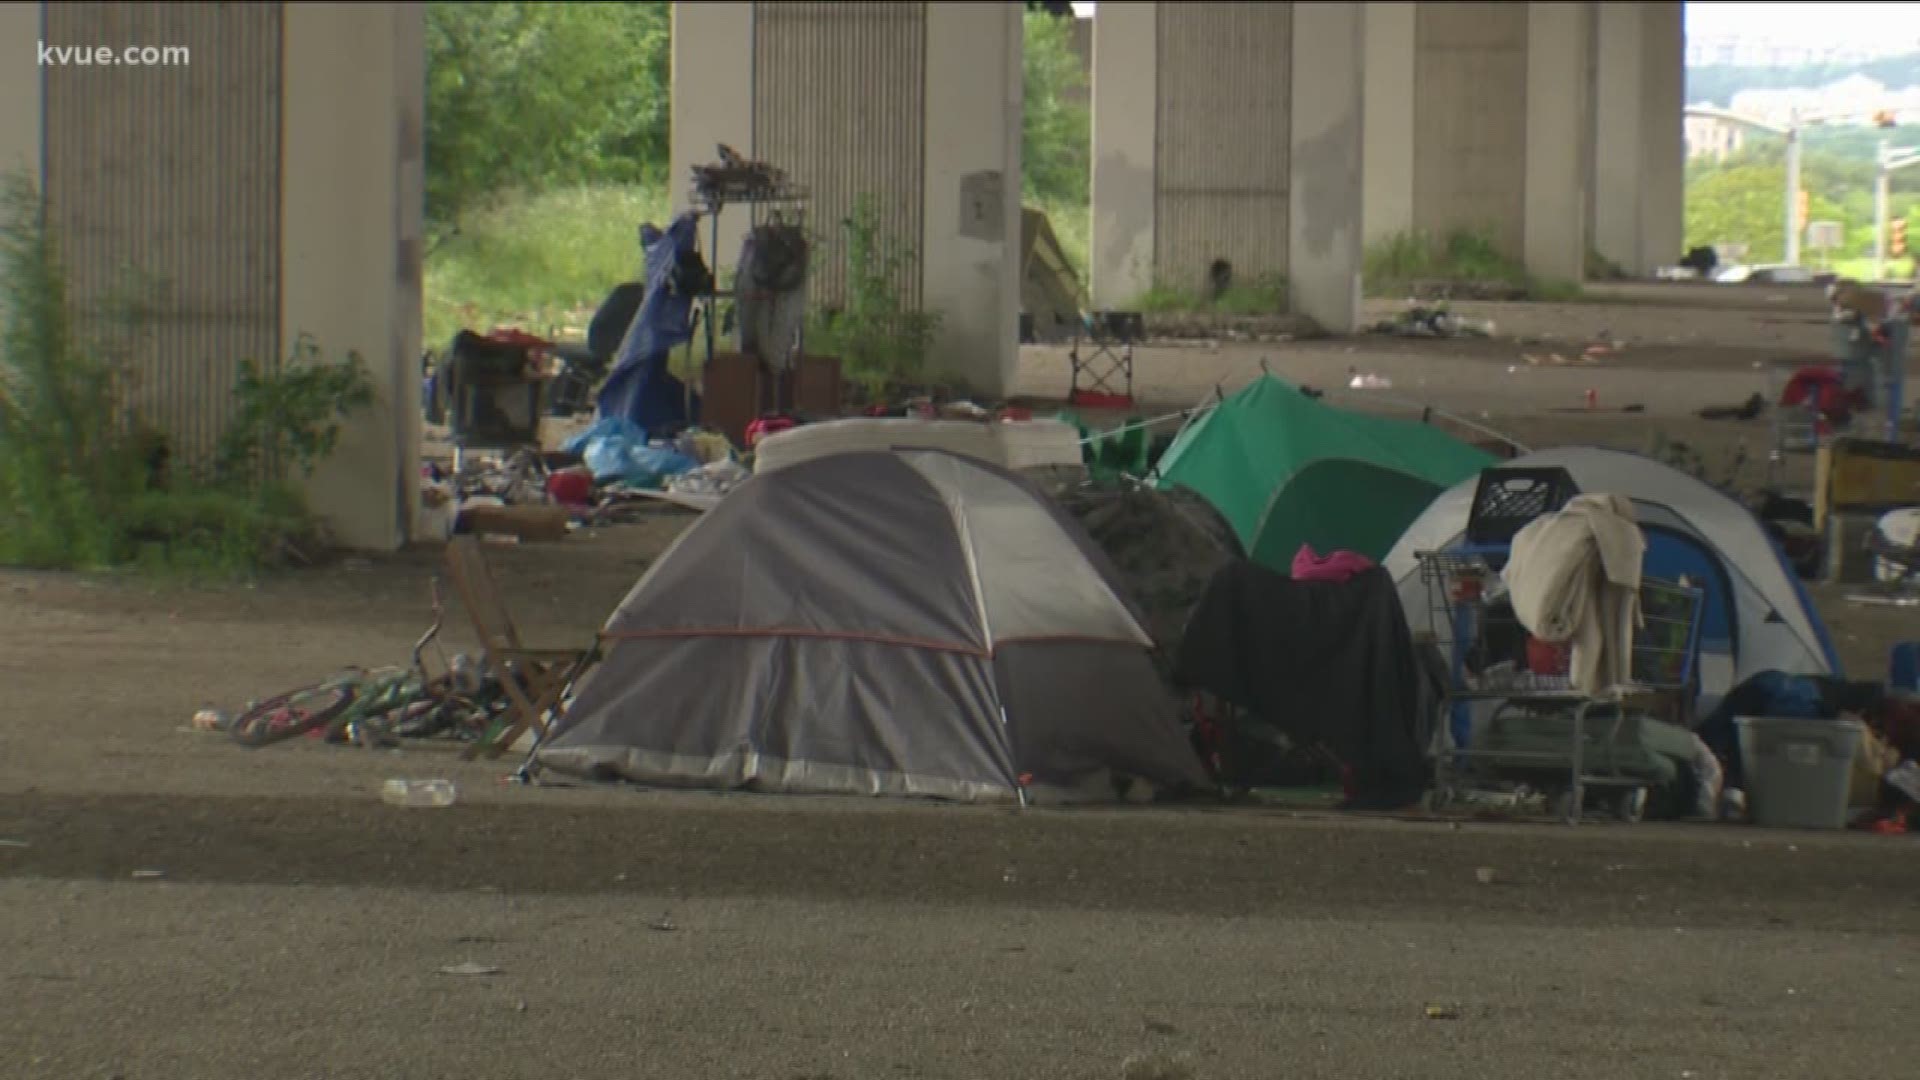 There are new complaints about the homeless population in South Austin. Molly Oak talked to a neighbor who said someone needs to step up to help.